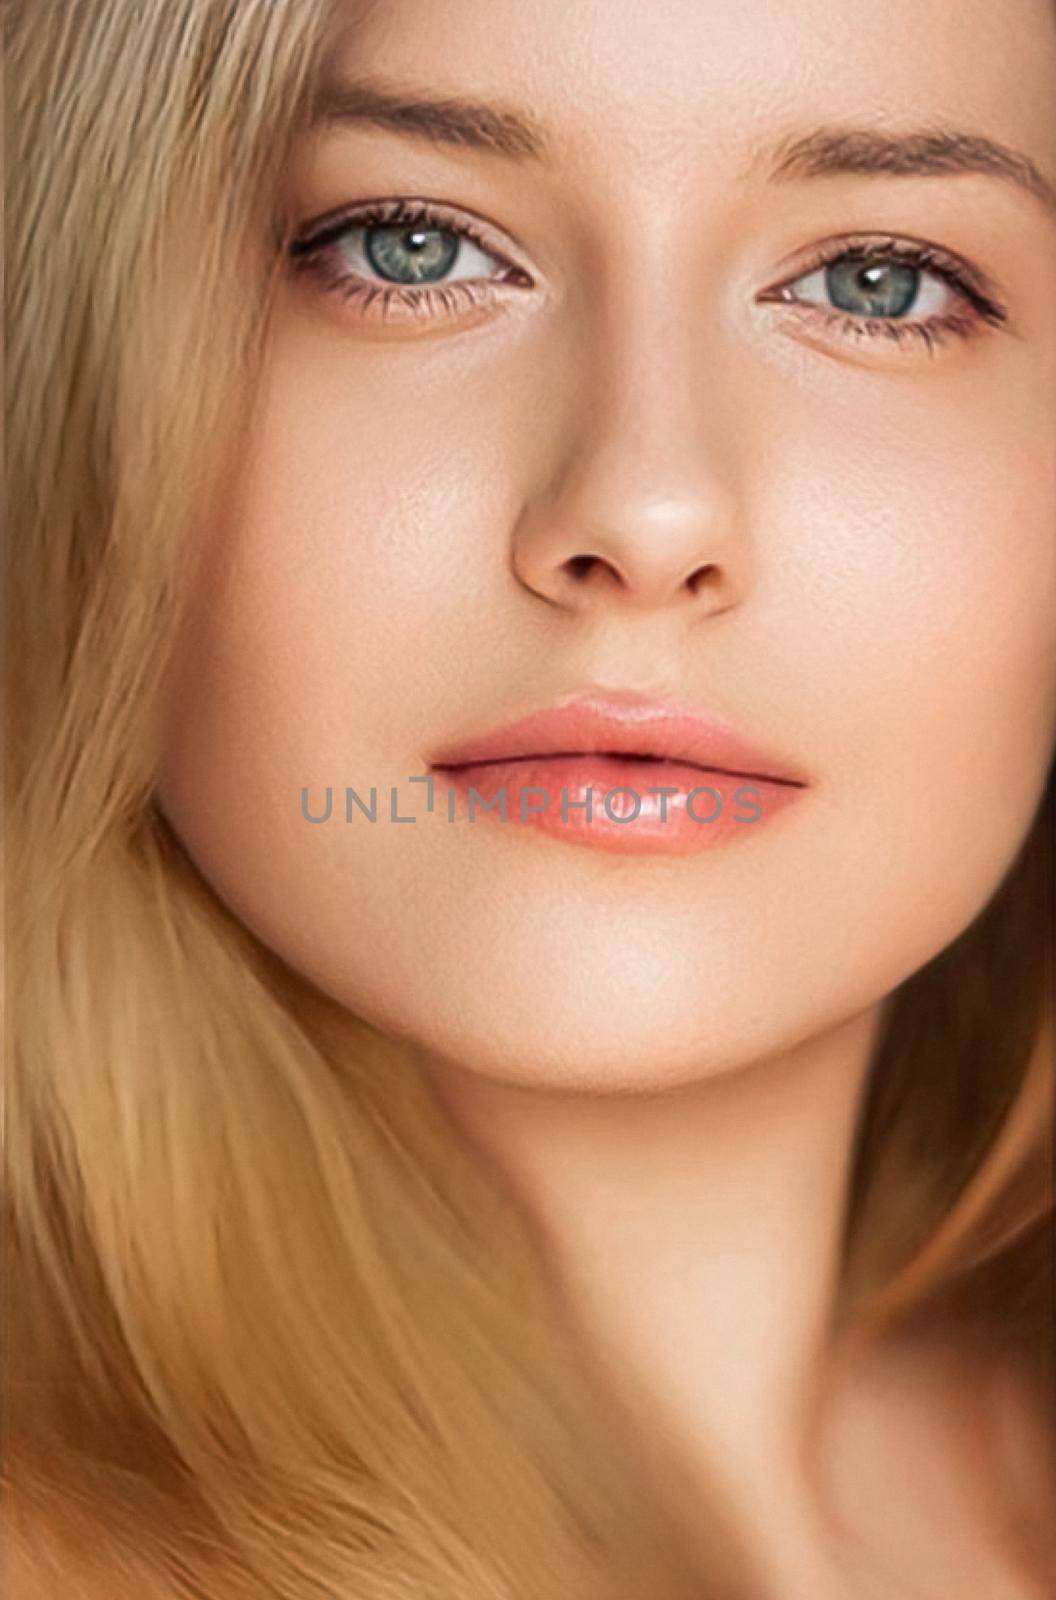 Natural beauty and no make-up look, beautiful young woman as skin care cosmetics and feminine brand concept, face portrait close-up